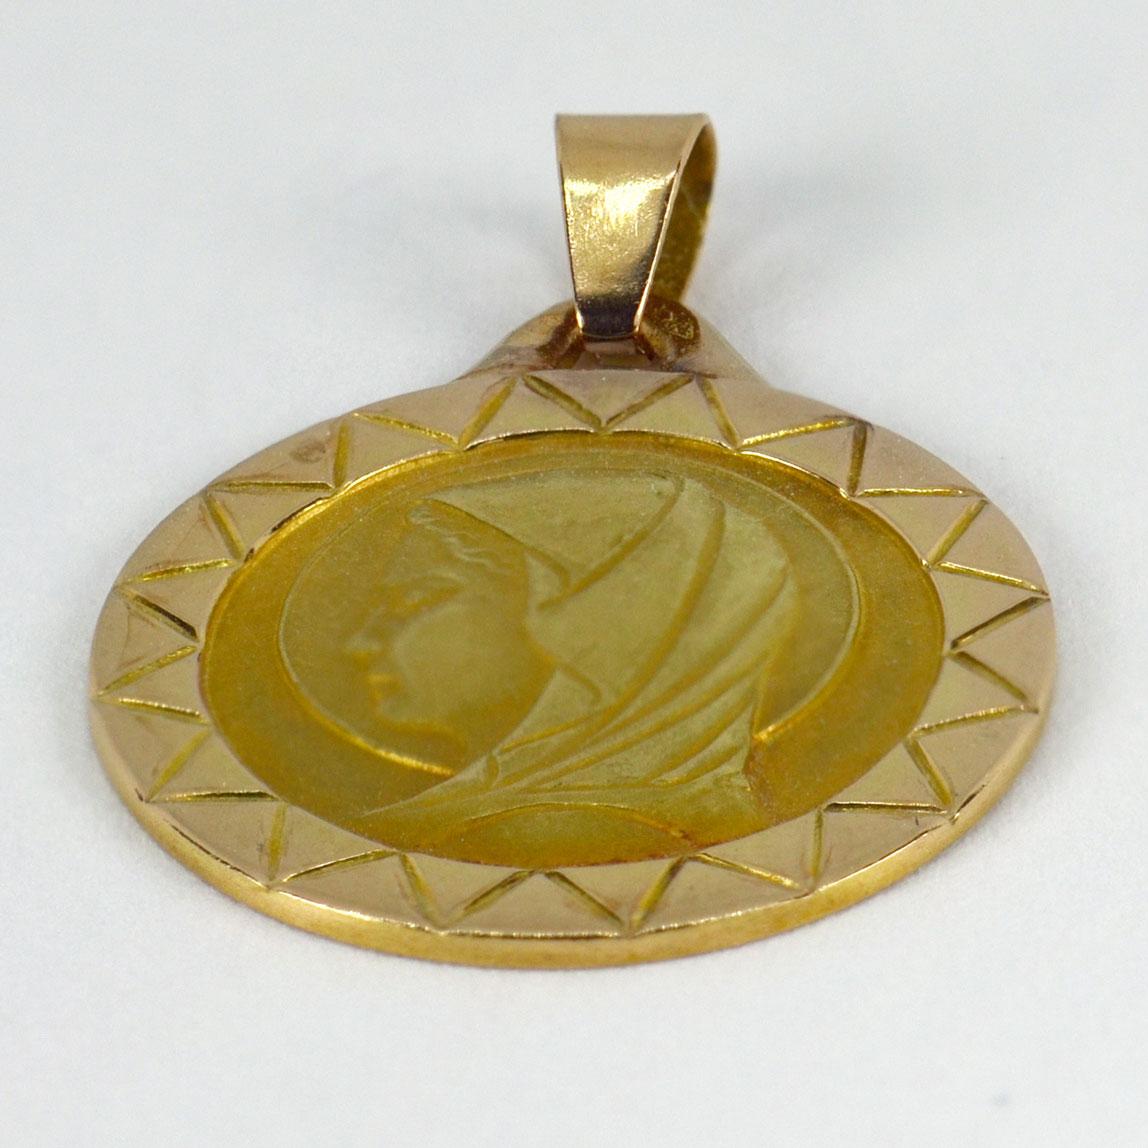 An 18 karat (18K) yellow gold charm pendant depicting the Virgin Mary. Stamped with the eagle’s head for French manufacture and 18 karat gold.

Dimensions: 1.8 x 1.2 x 0.1 cm (not including jump ring)
Weight: 1.67 grams 
